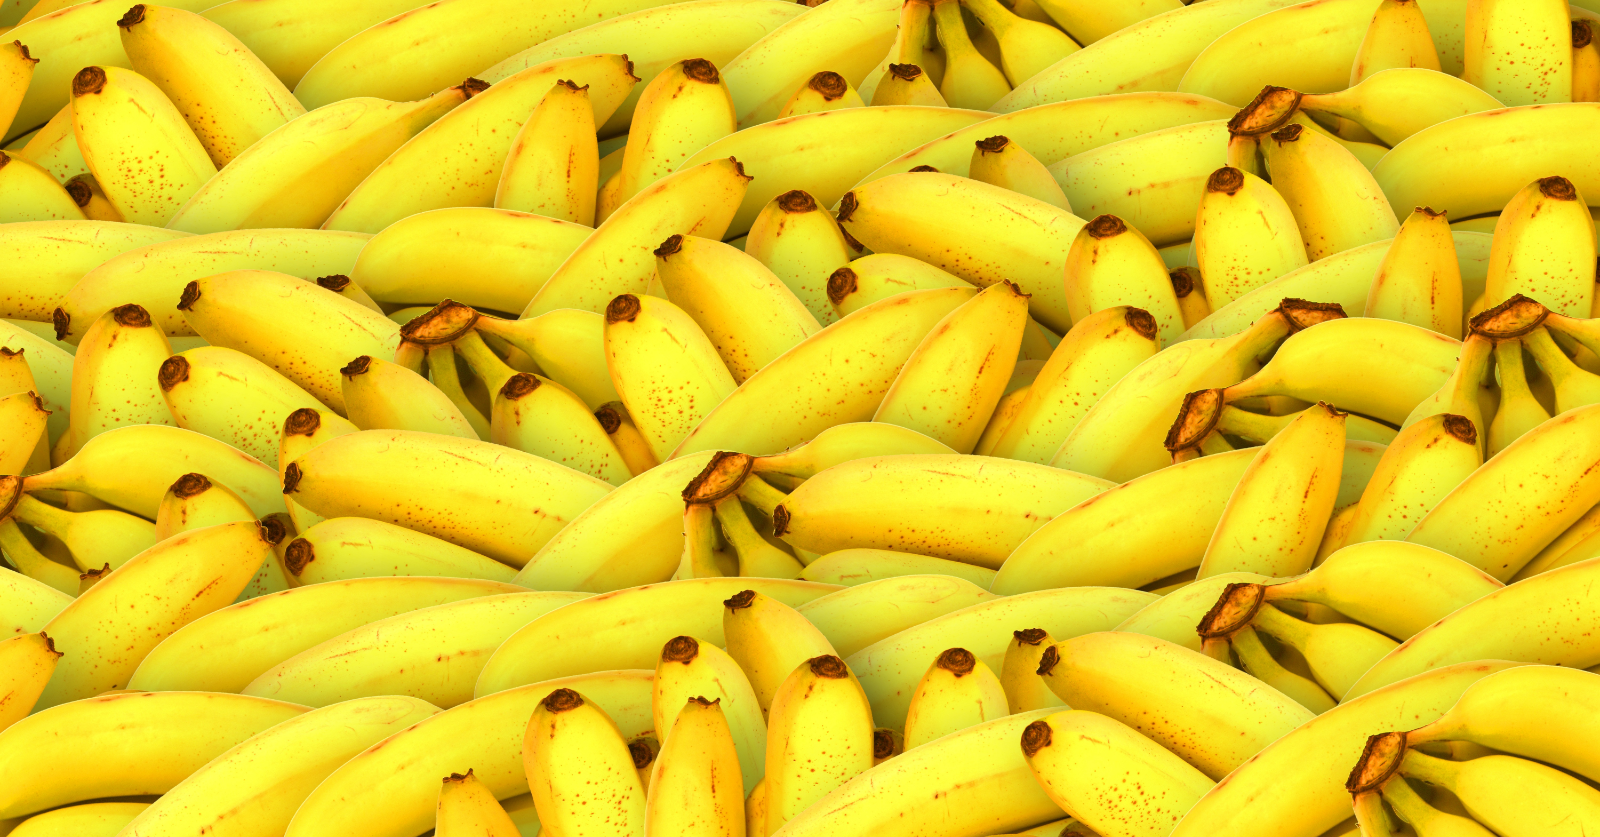 Why bananas are being used to smuggle cocaine